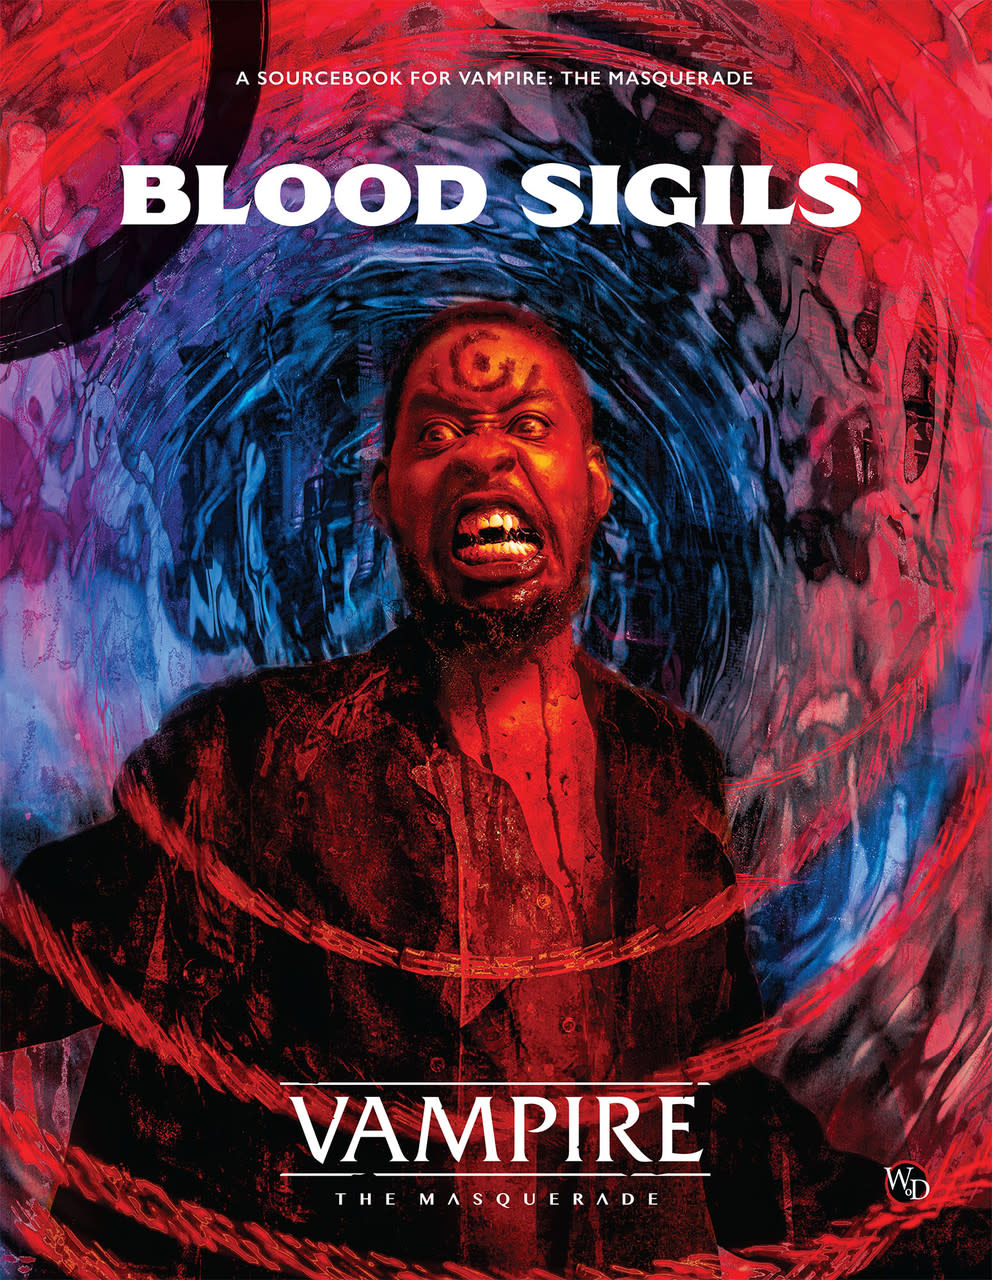 World of Darkness - Vampire: The Masquerade - Blood Sigils Cover